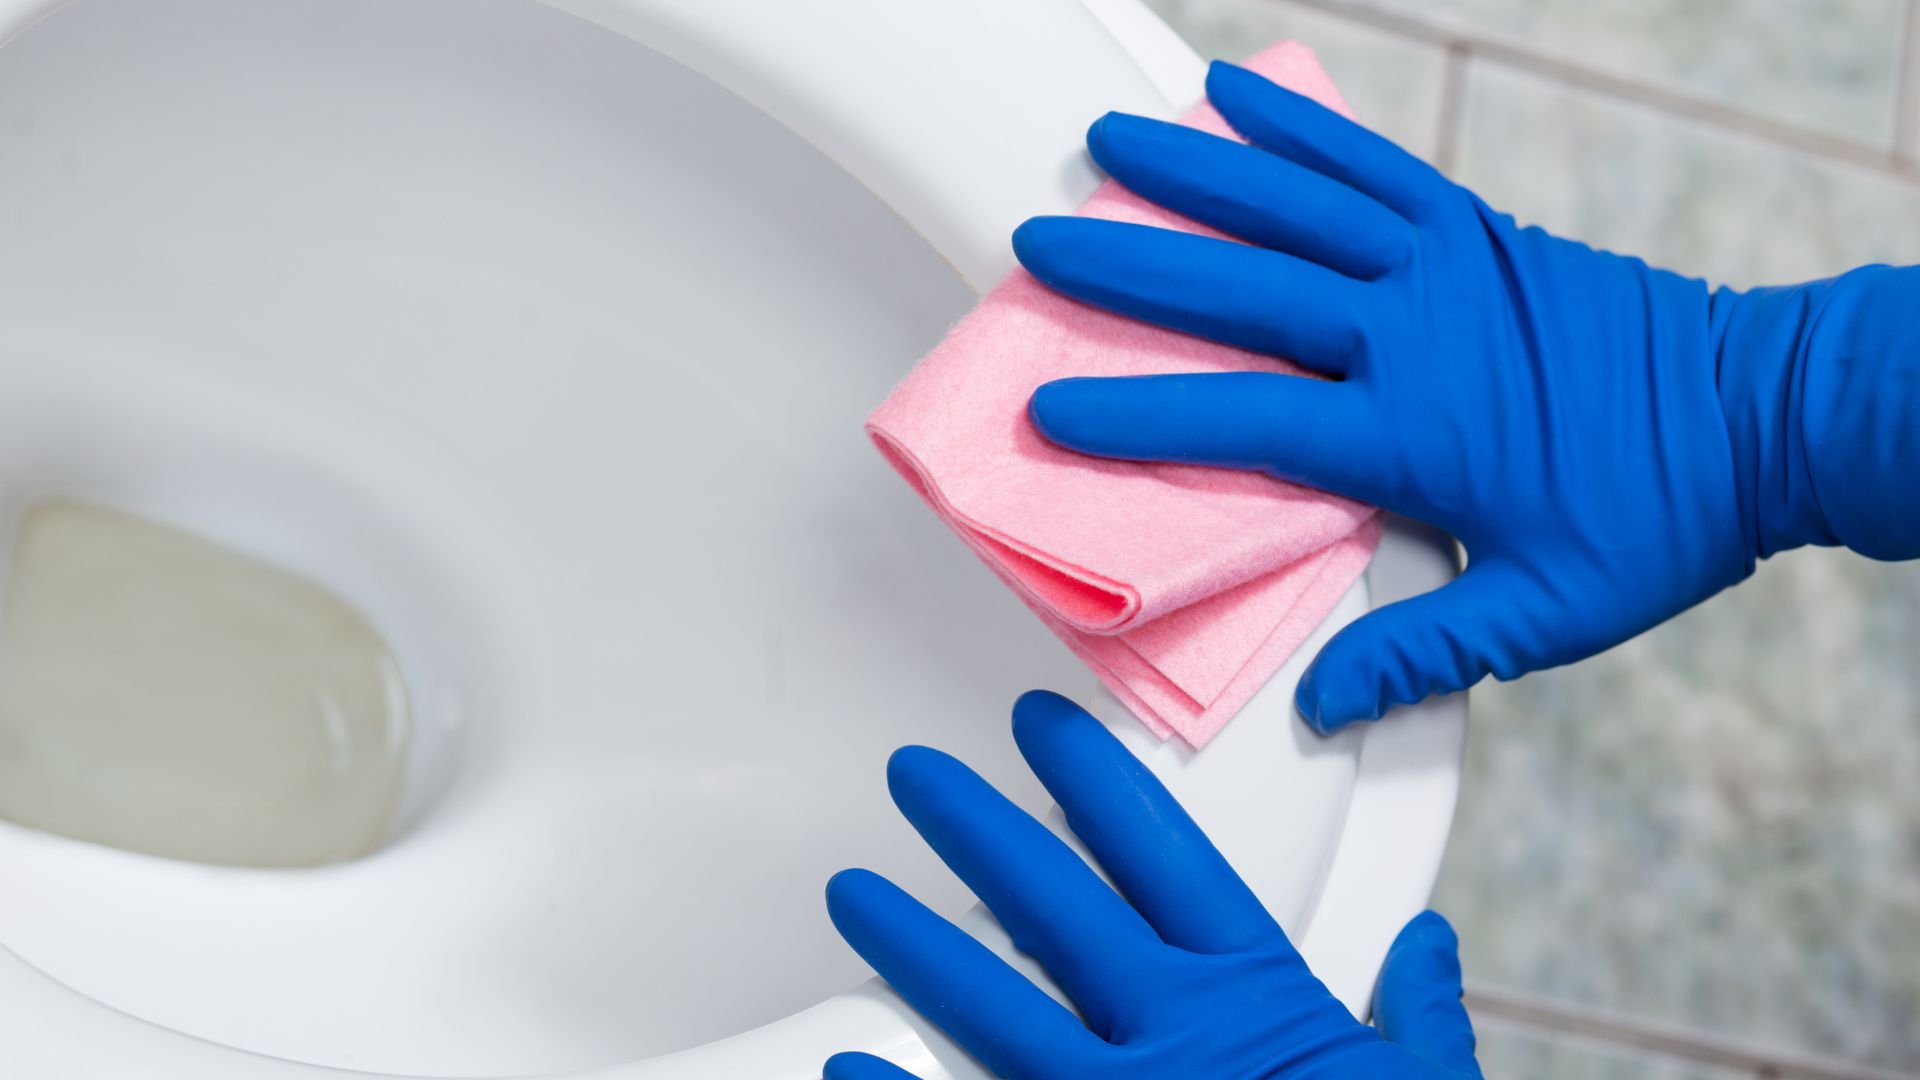 Implementing Regular Cleaning Practices Recommended by Plumbers